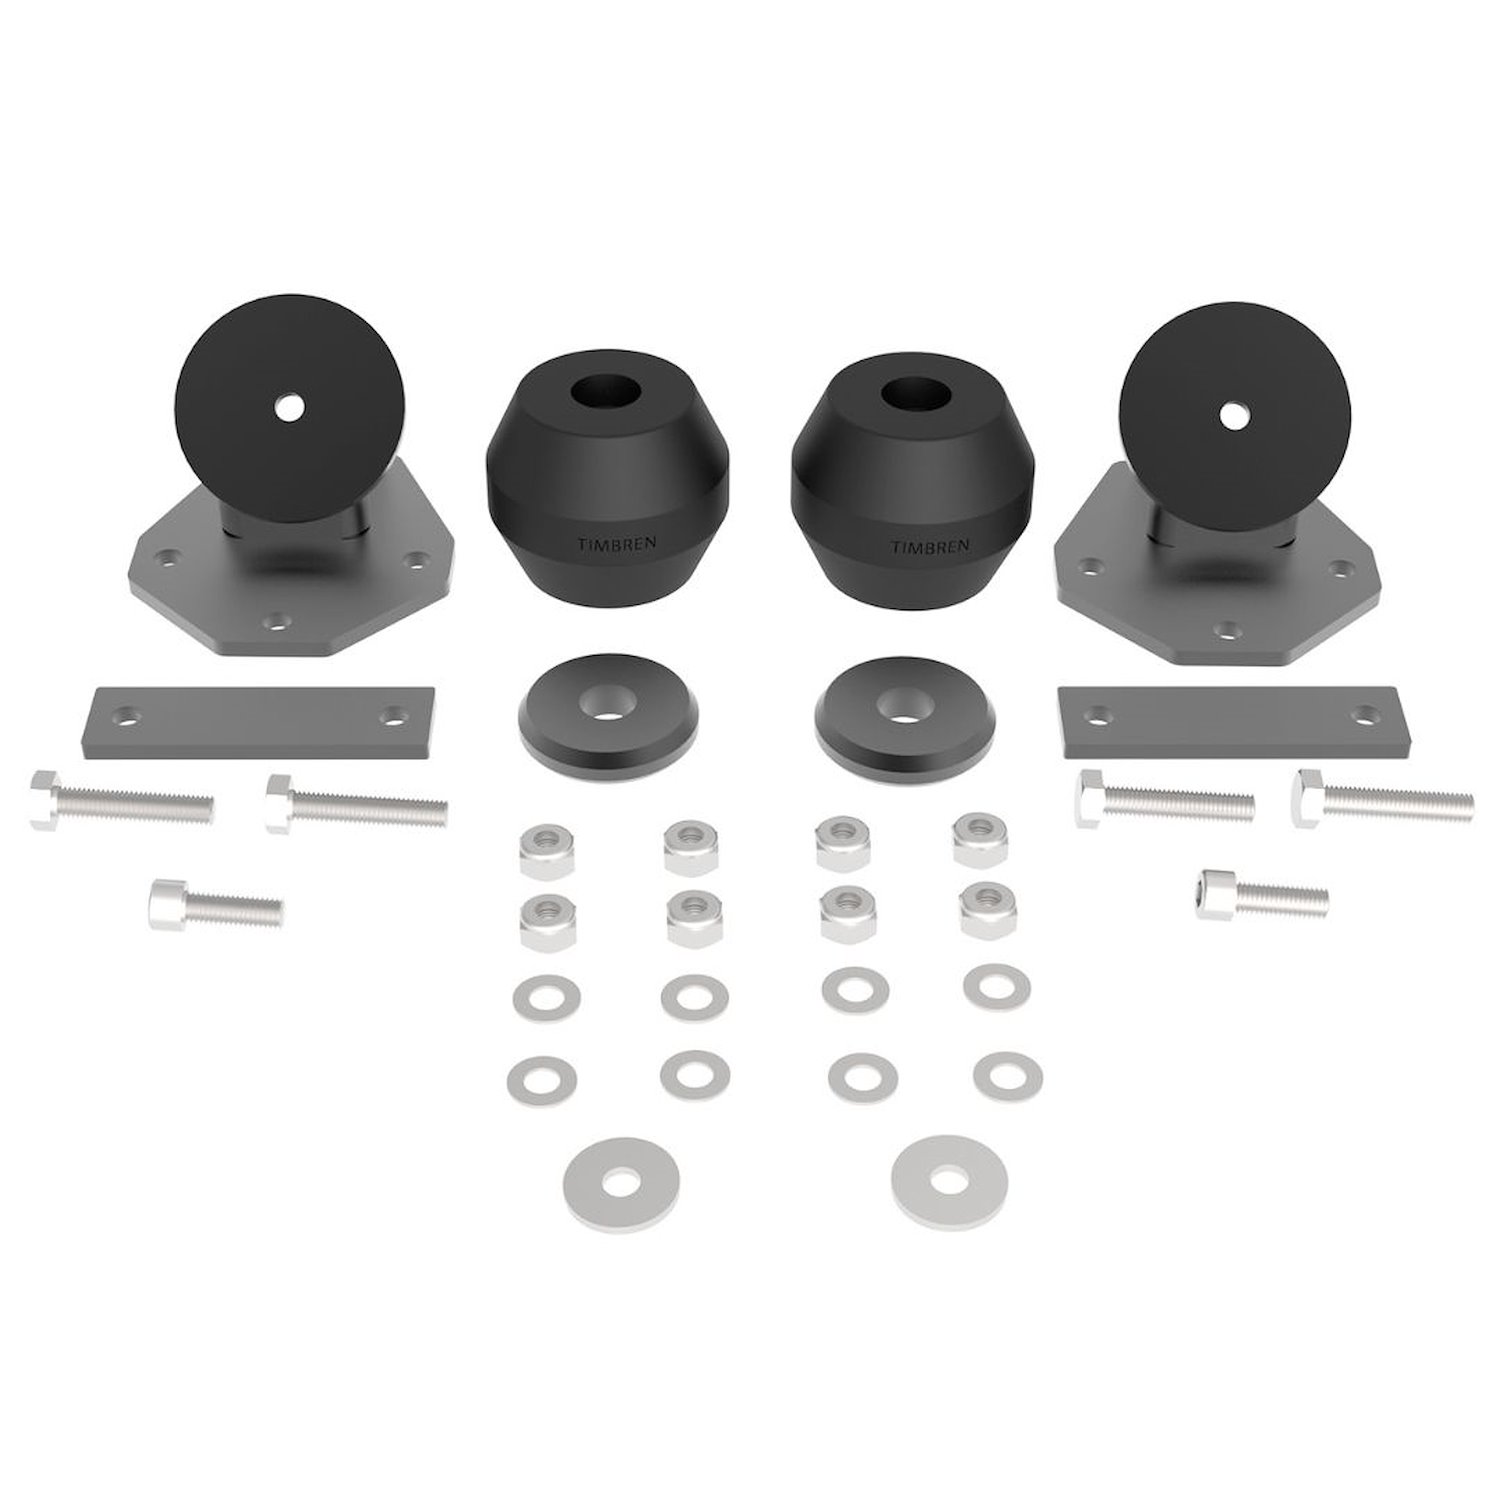 GMREQNX SES Suspension Enhancement System for Select Chevy Equinox, Rear Kit [Rated Capacity: 6000 lbs.]